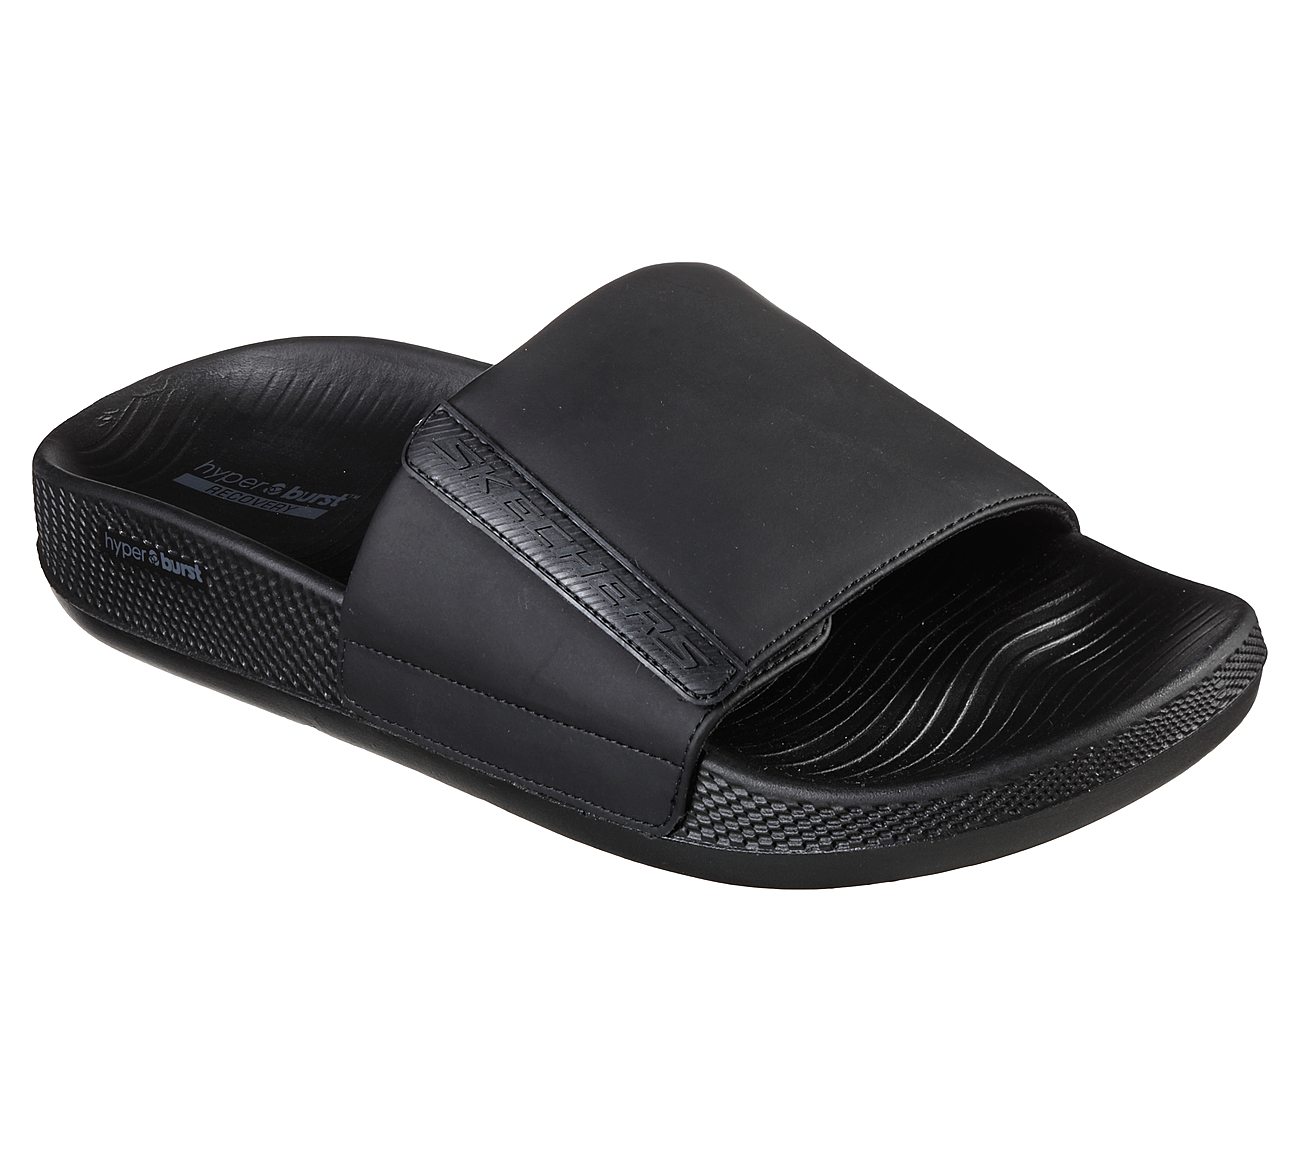 HYPER SLIDE - RELIANCE, BBLACK Footwear Lateral View